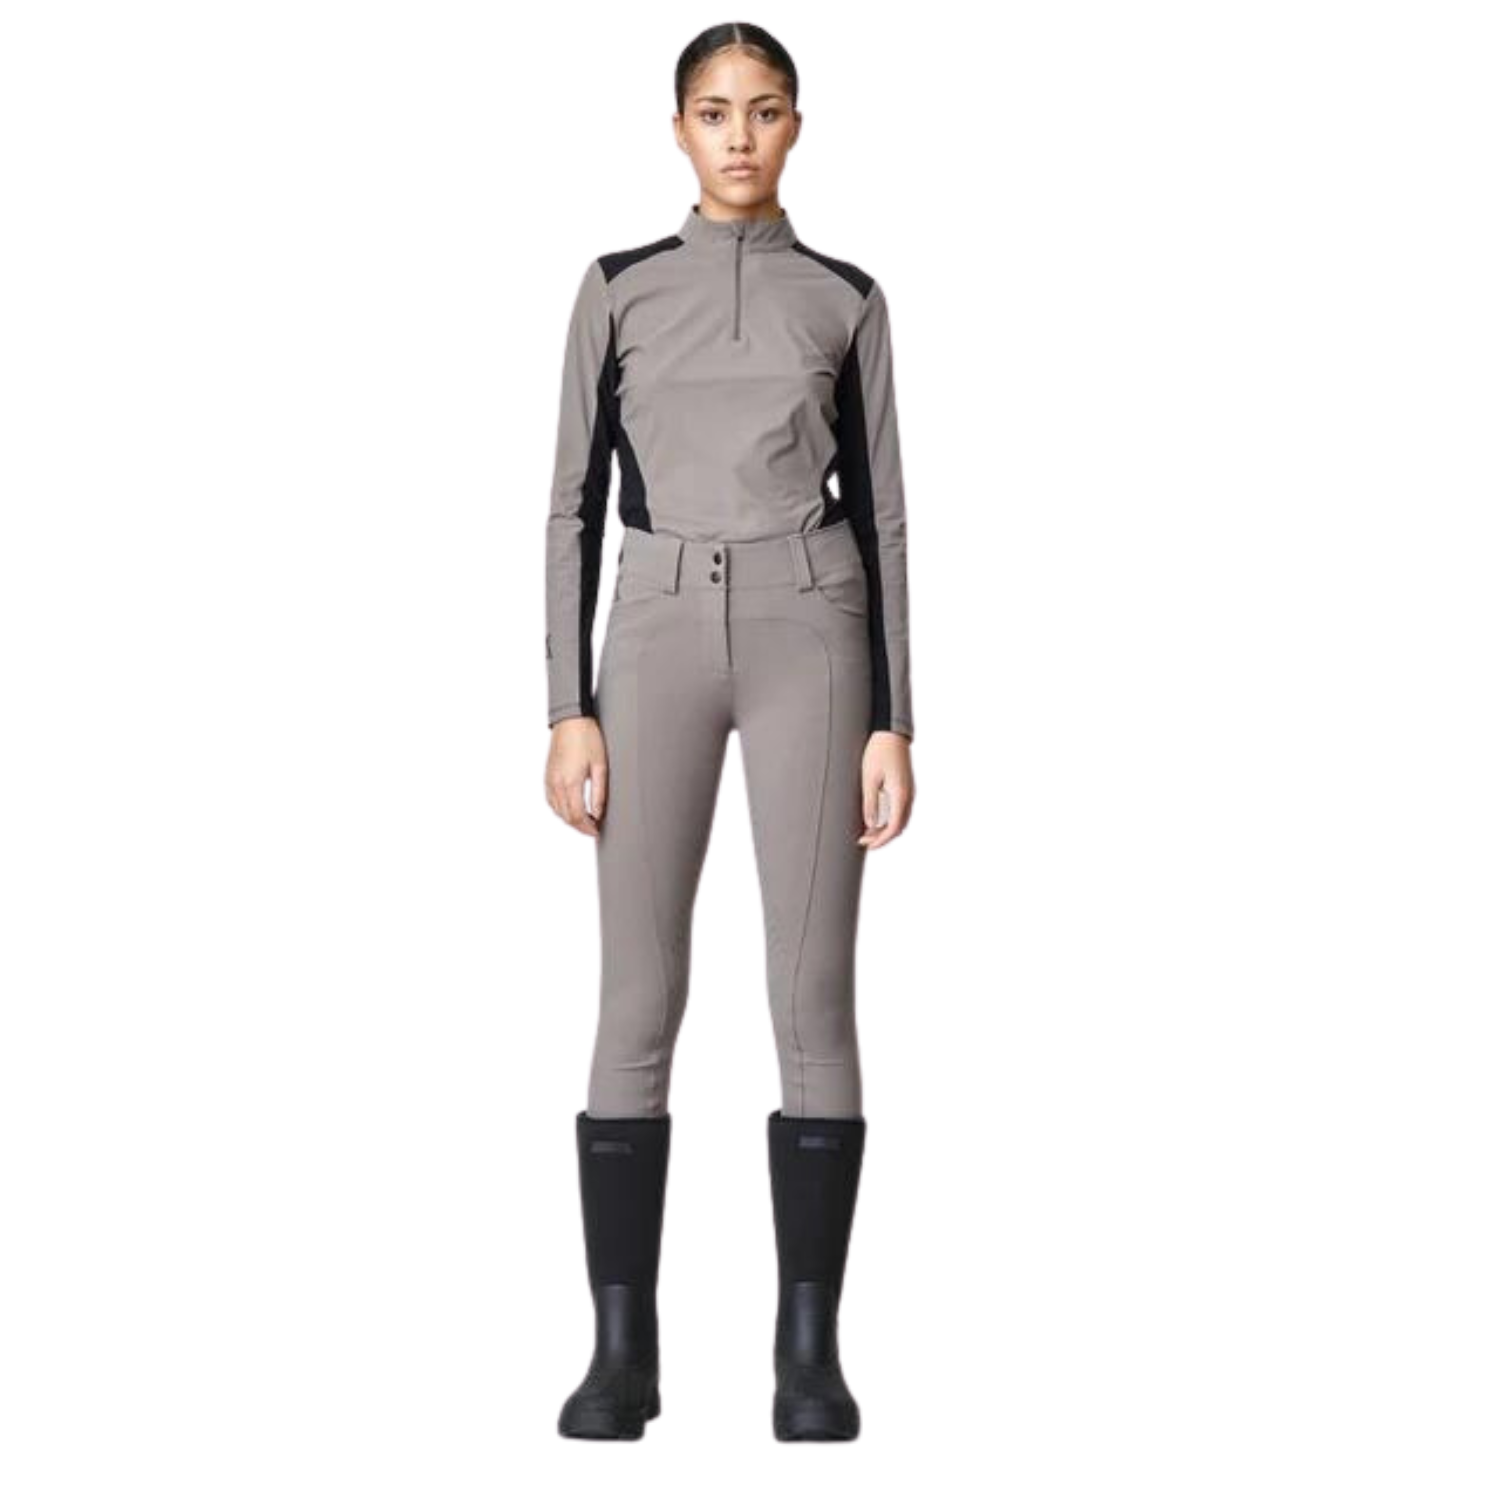 Ladies Compression High Rise Performance Knee Grip Breeches - Taupe (LAST ONE - X-Small - IT38 - UK6)